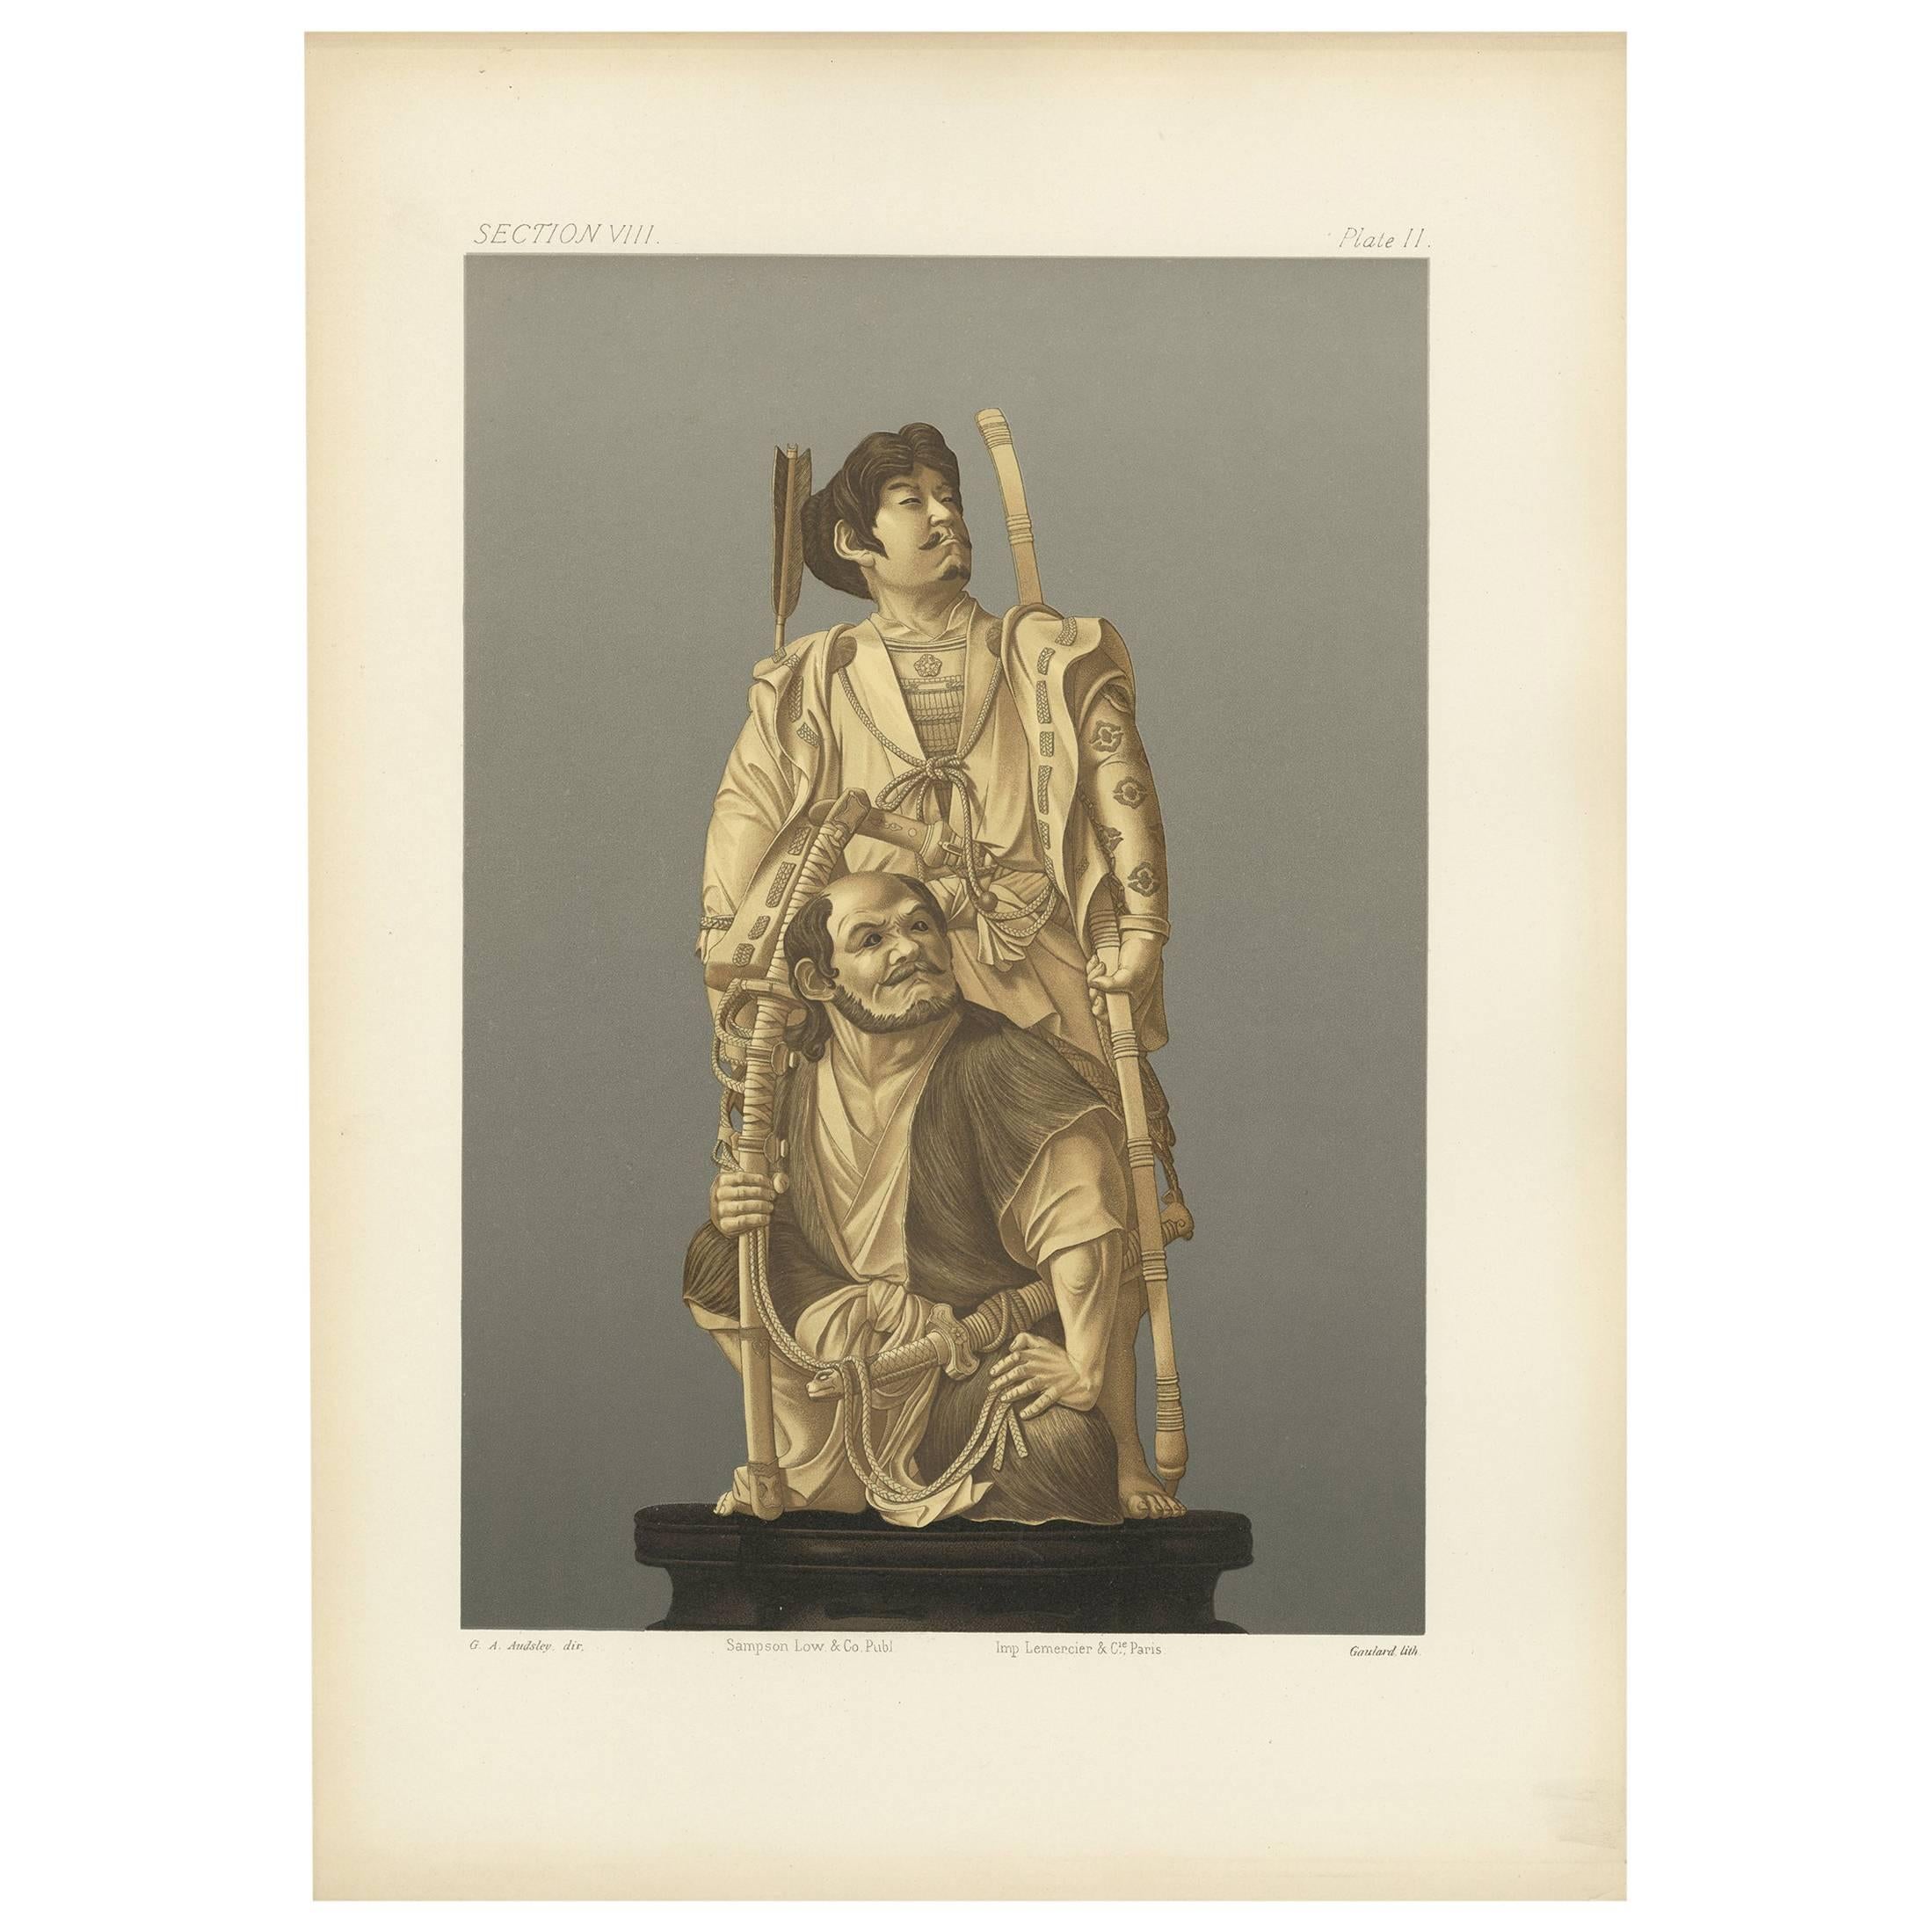 Antique Print of Japanese Carving in Ivory and Wood by G. Audsley, 1884